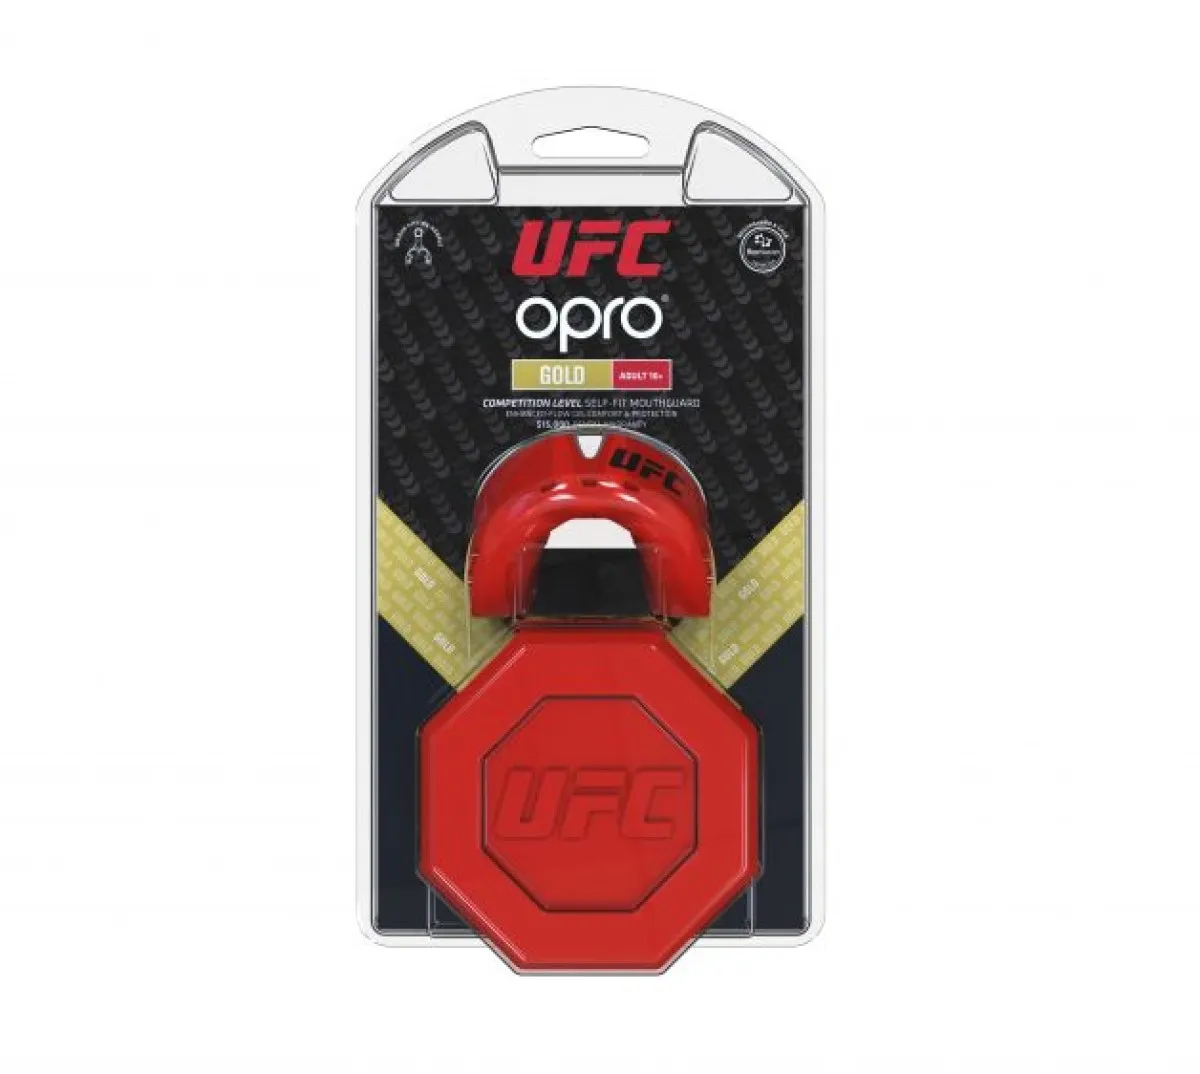 OPRO mouthguard UFC Gold - red/silver, Senior